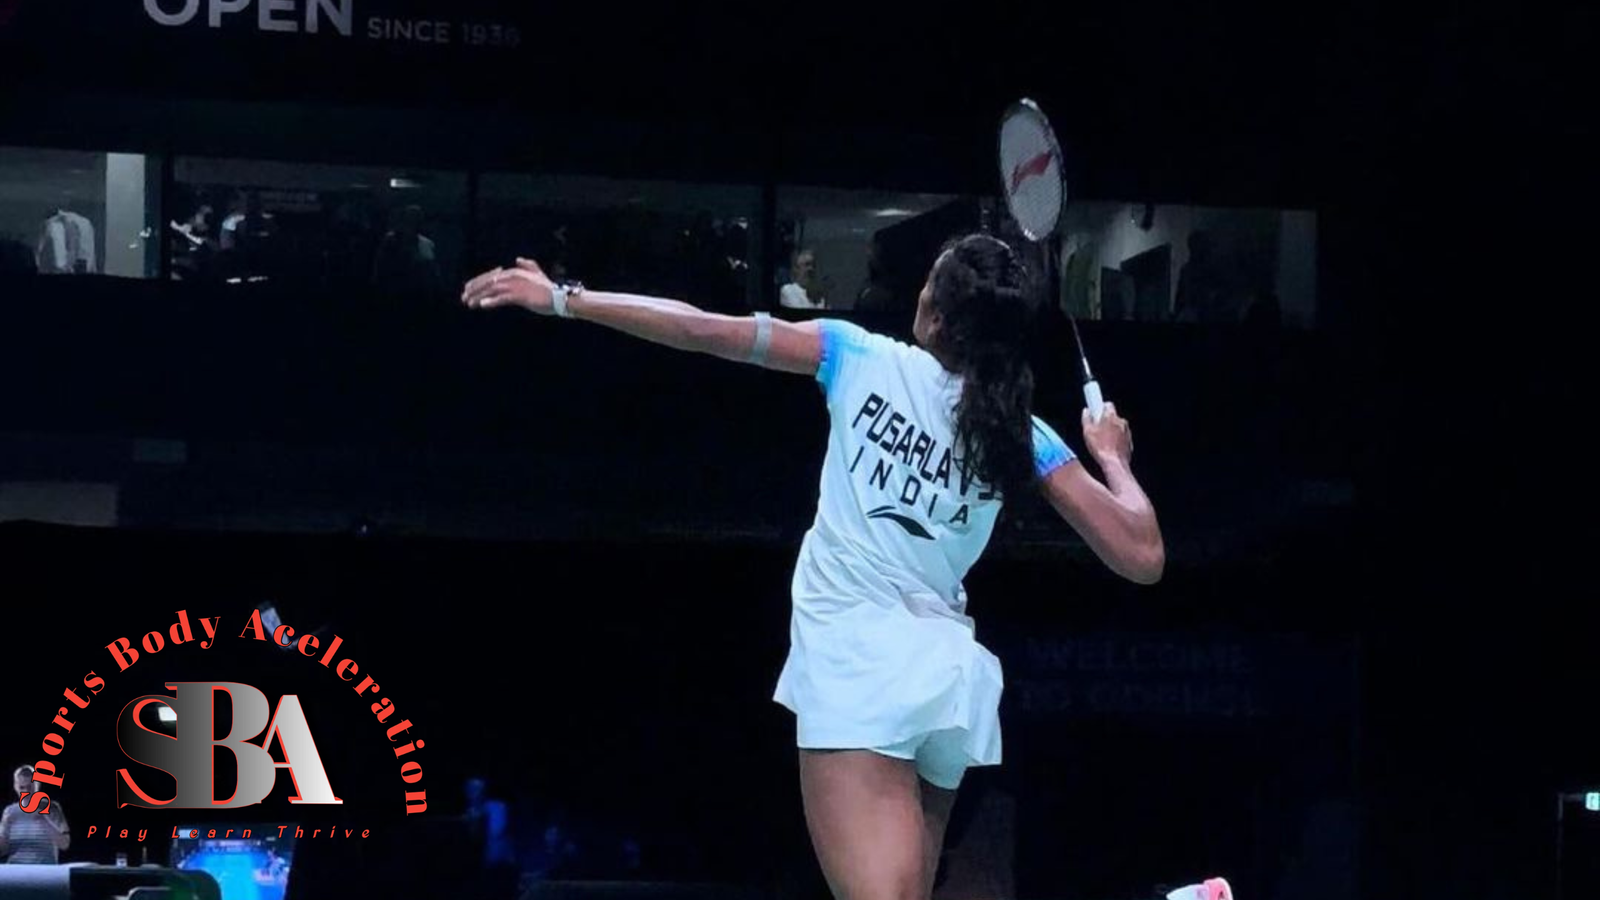 PV Sindhu Prepares for Paris 2024: "Smarter" Approach Needed to Overcome Tougher Competition